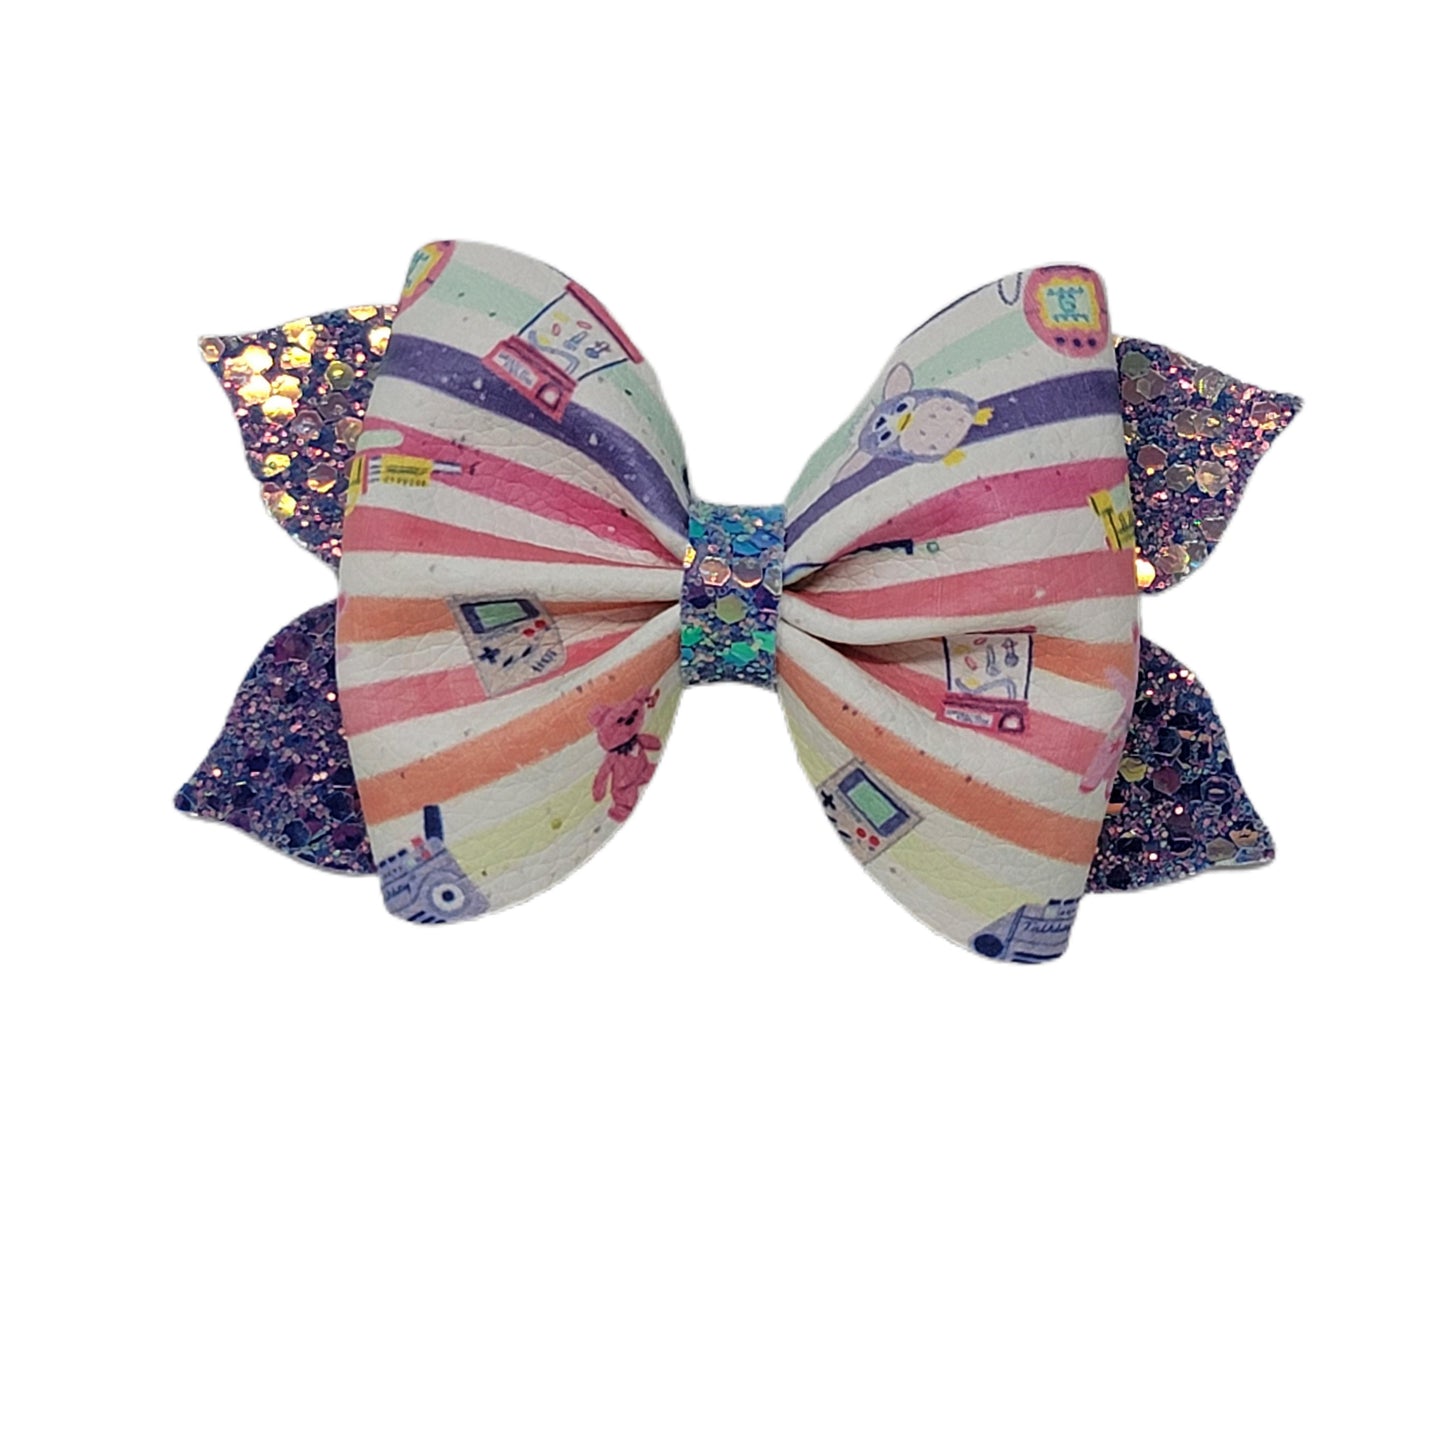 3.5 inch 90's Toys Pixie Pinch Bow